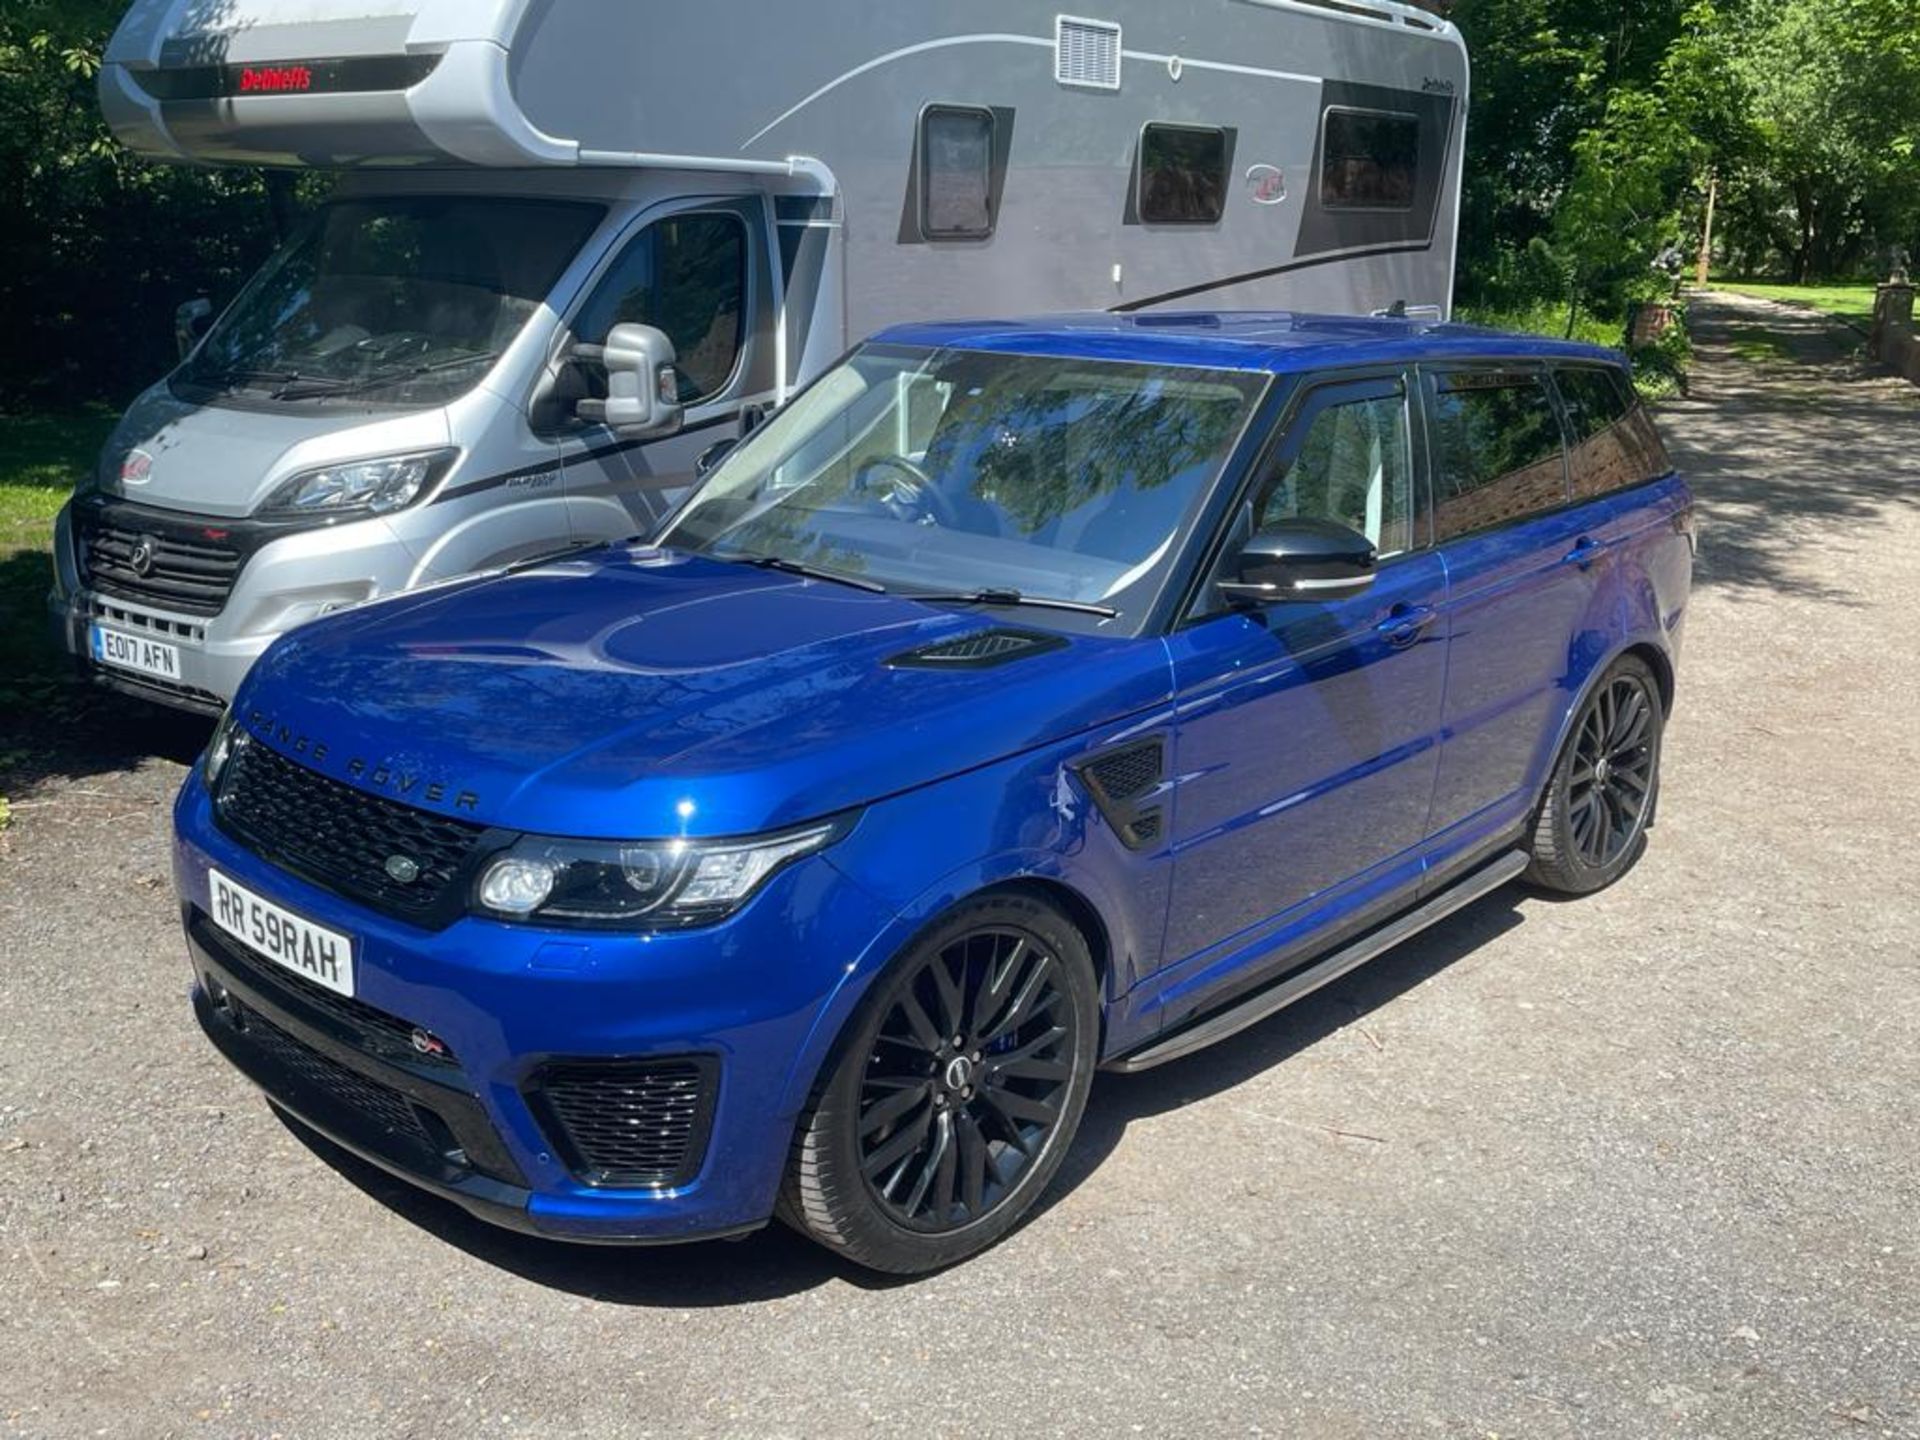 2016 RANGE ROVER SPORT SVR AUTOBIOGRAPHY DYNAMIC V8 SUPERCHARGED AUTOMATIC 5.0 550PS PETROL ENGINE - Image 12 of 28